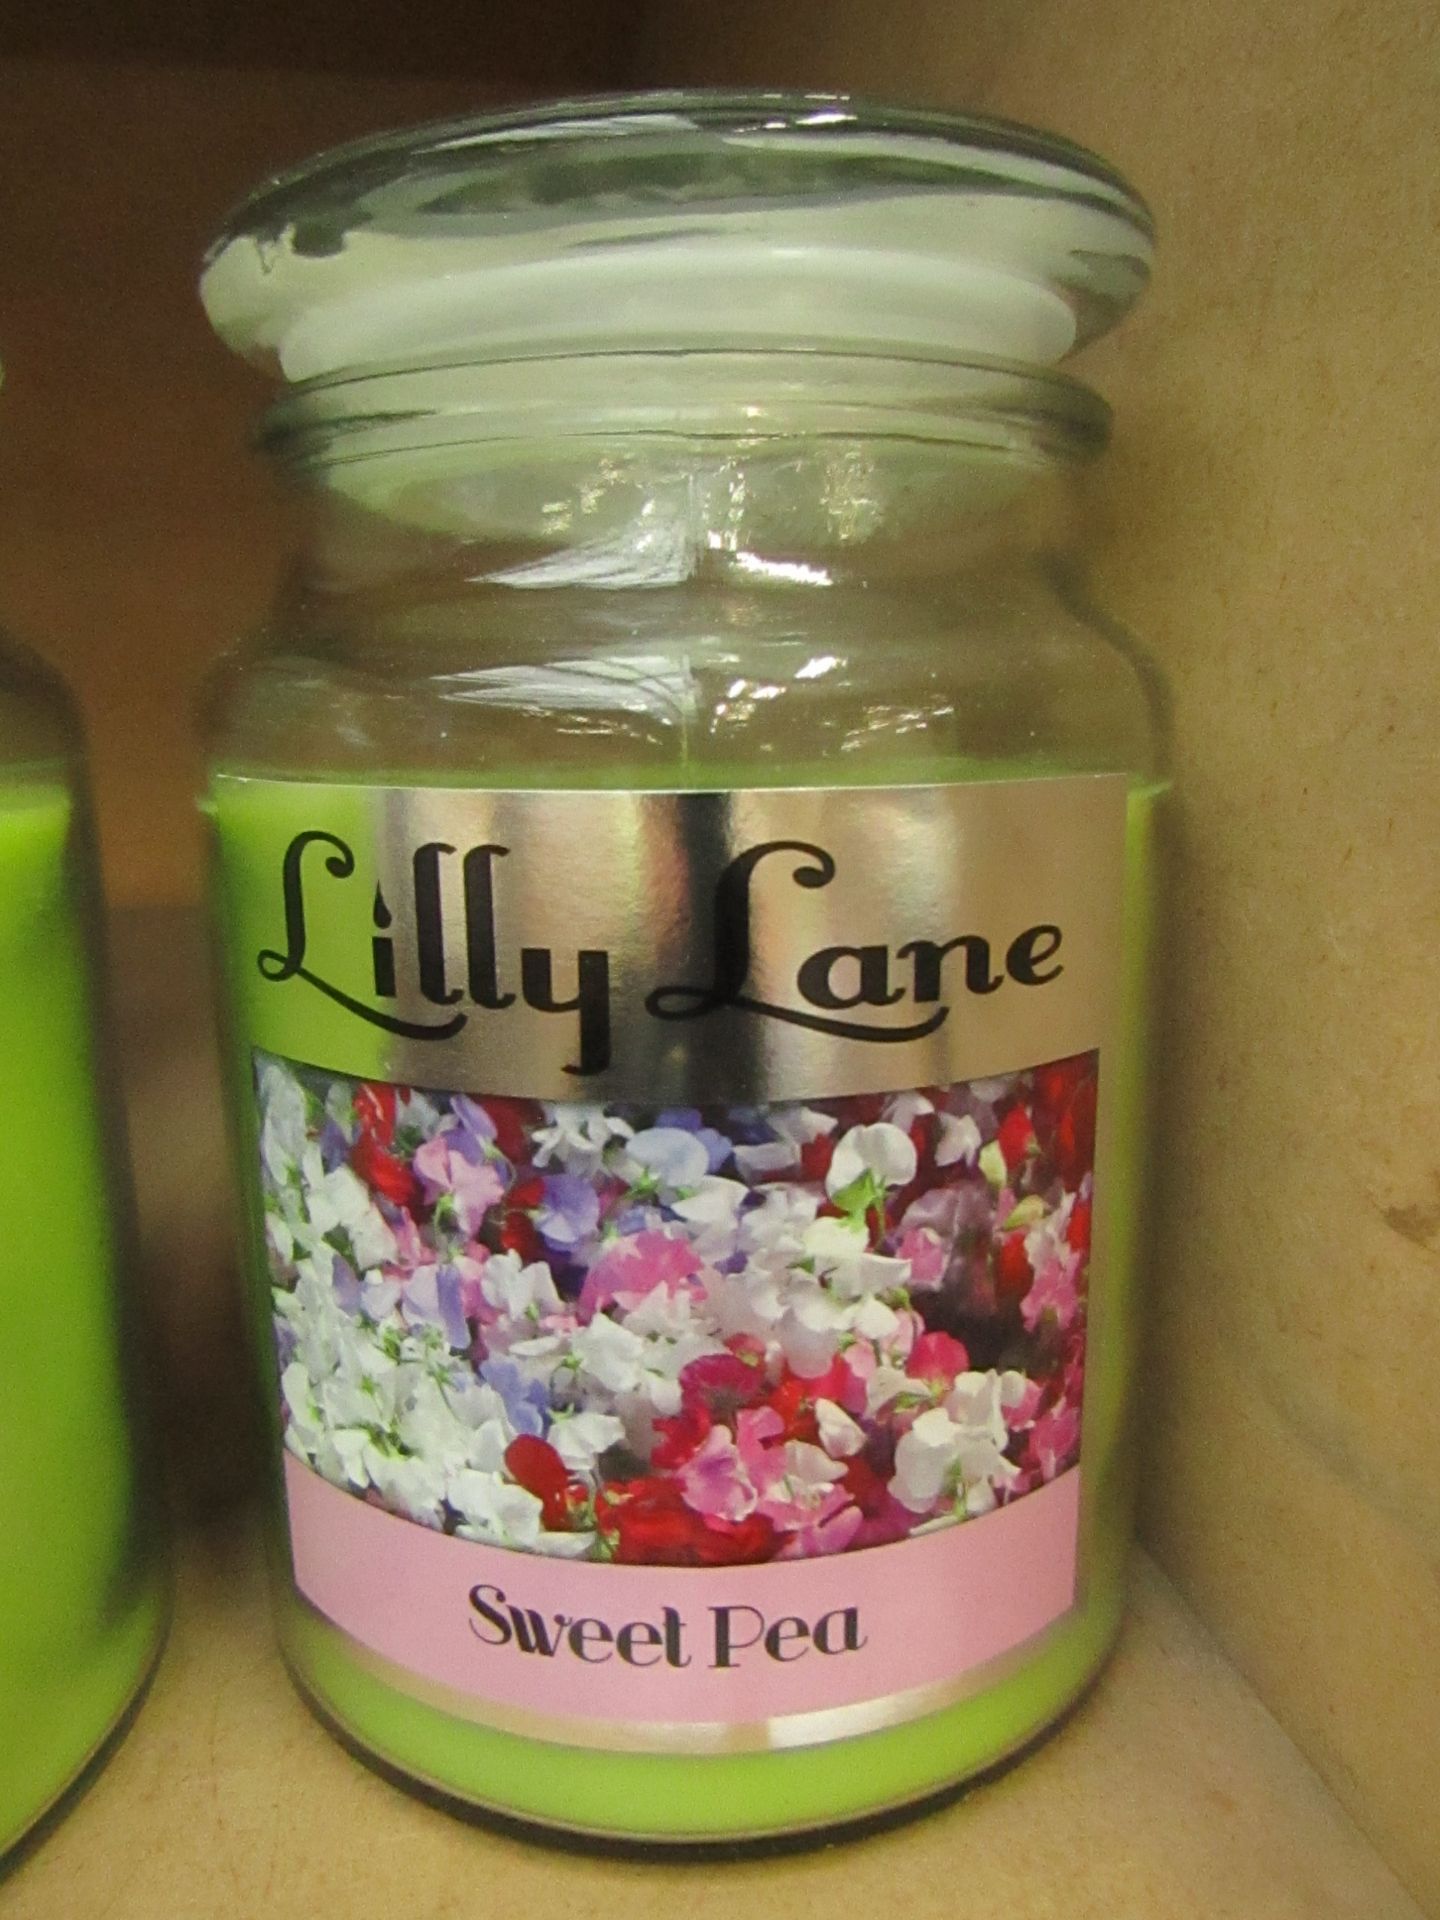 Lilly Lane - Sweet Pea Scented Candle, new.